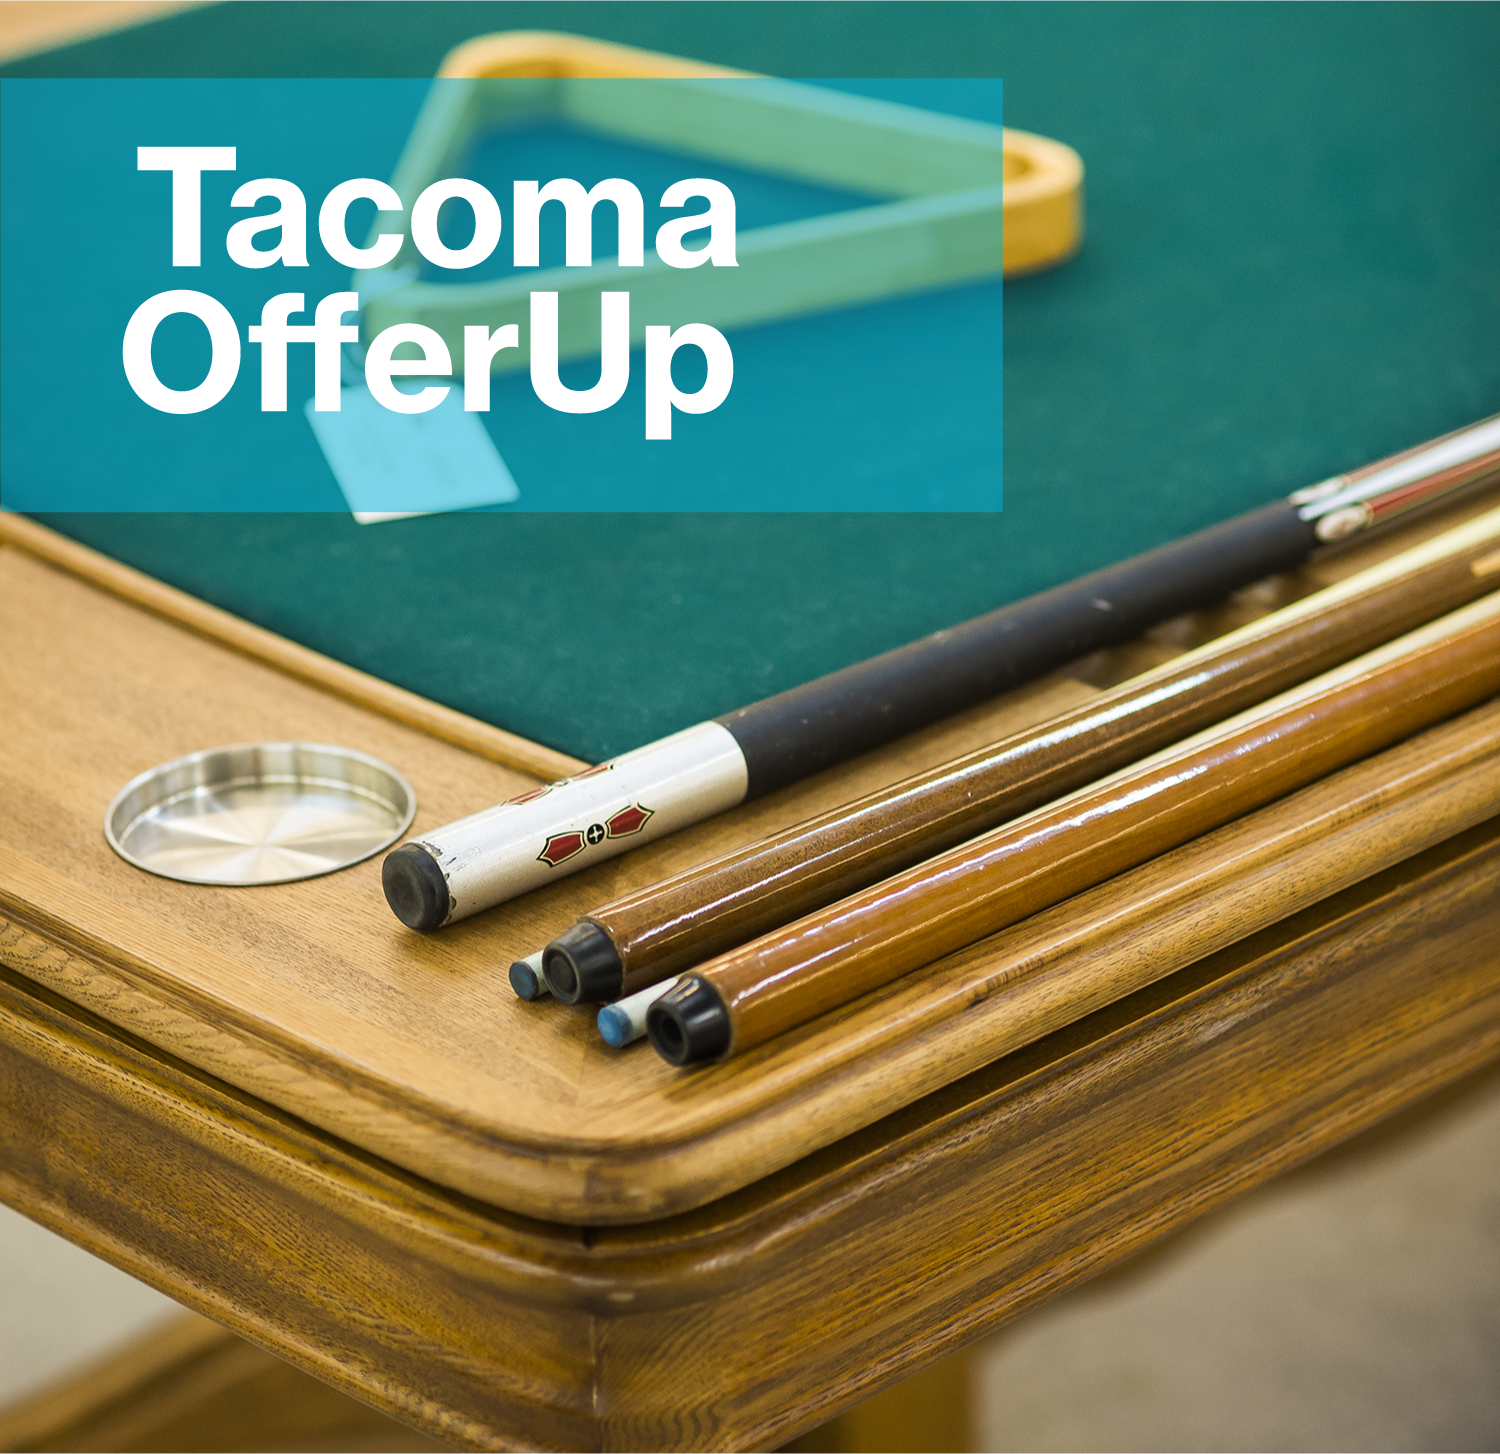 Tacoma OfferUp